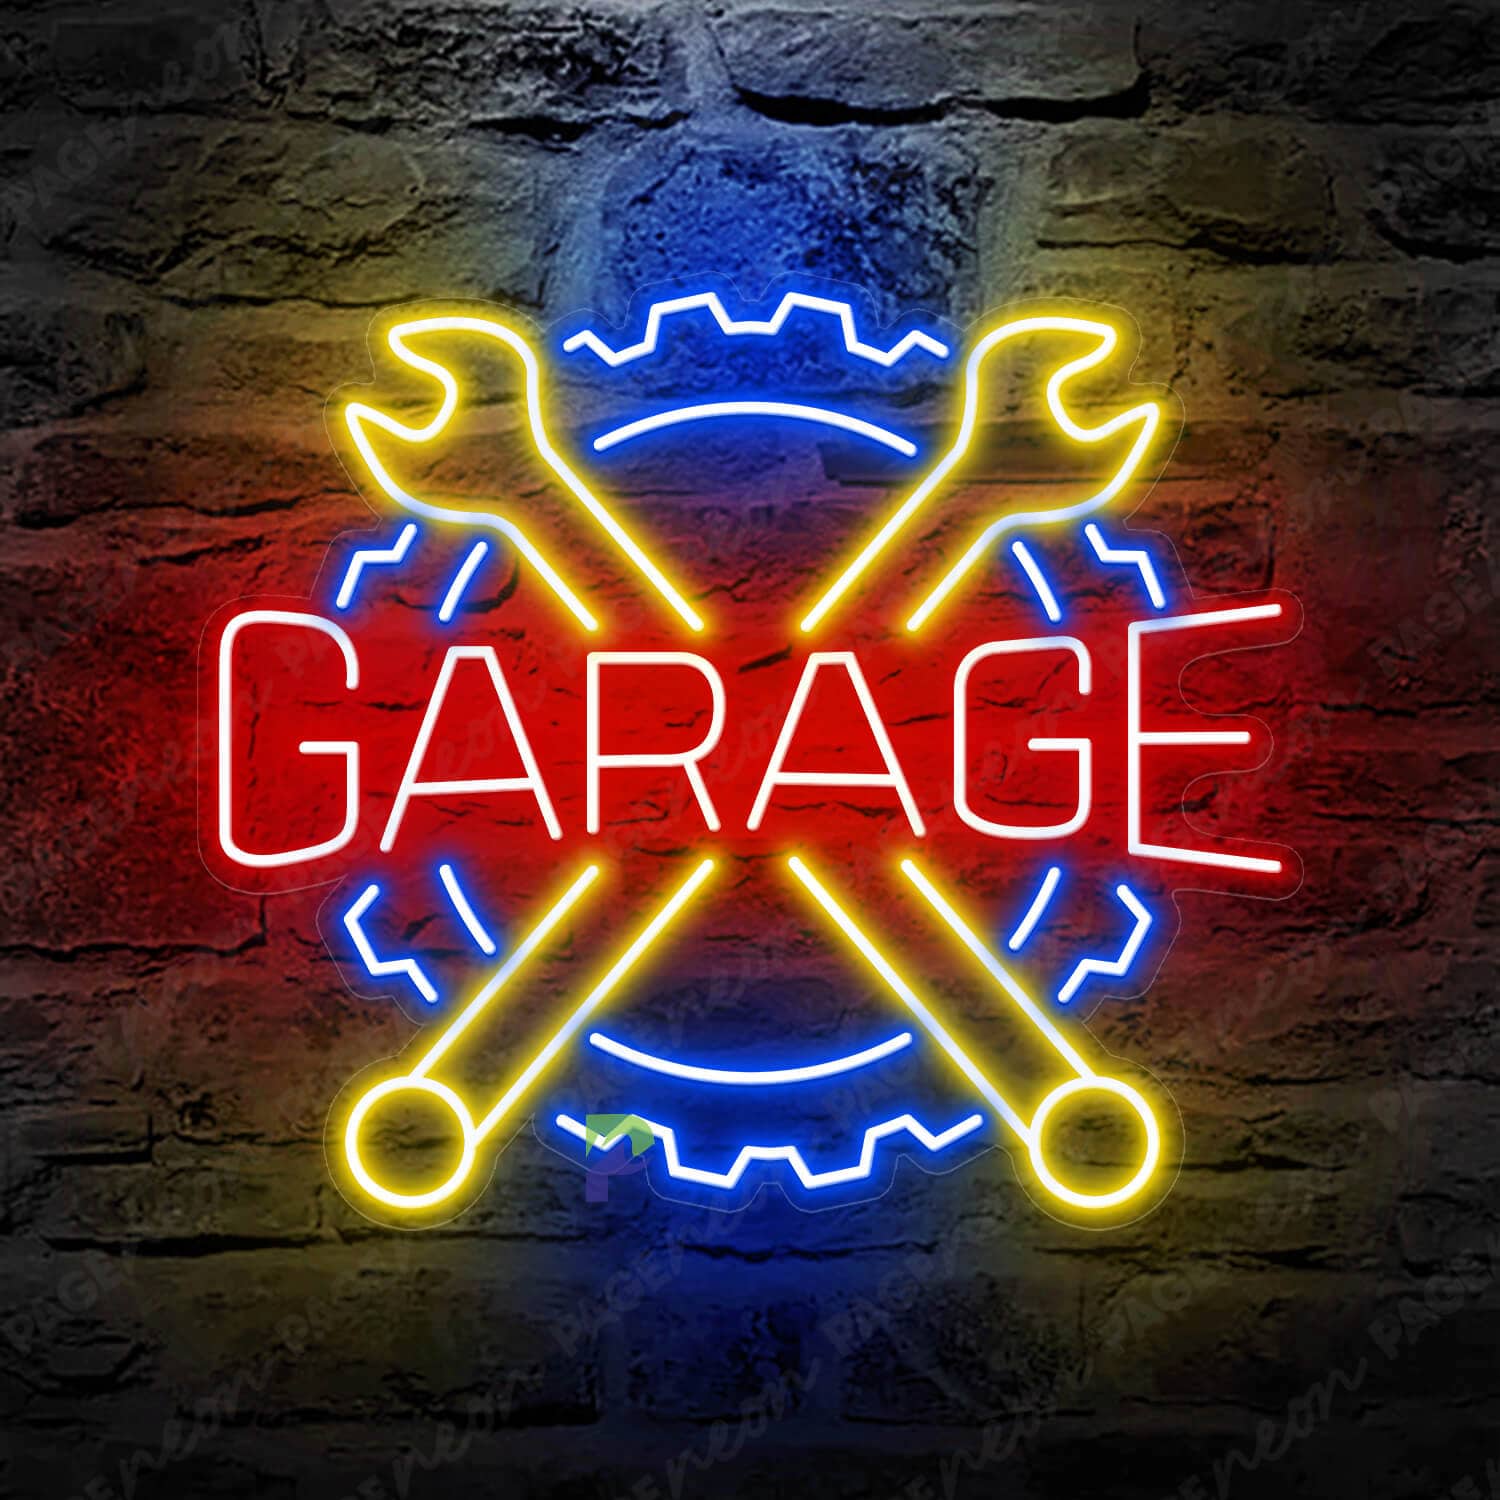 Garage Neon Signs - Free Shipping - Complimentary Remote Control - PageNeon